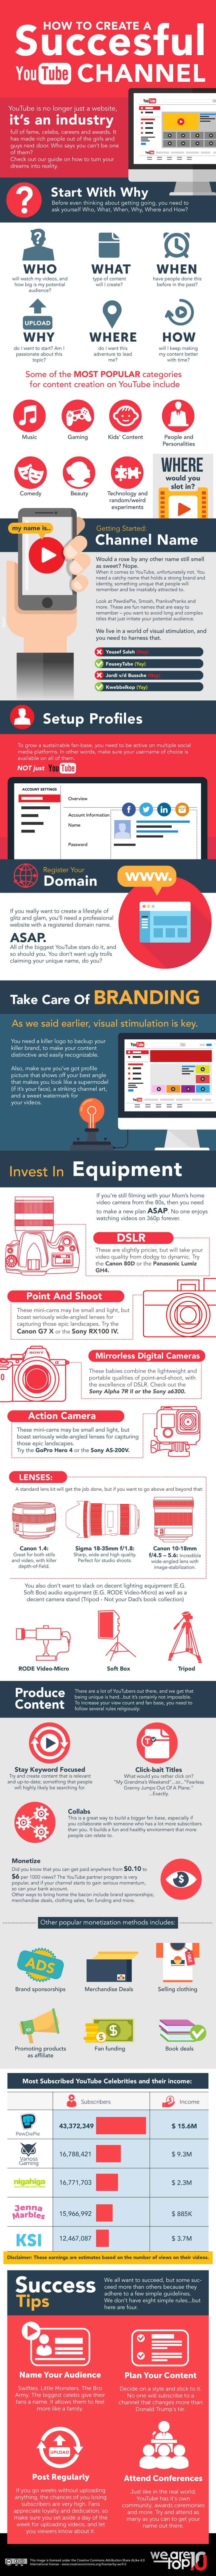 how-to-start-a-successful-youtube-channel-infographic